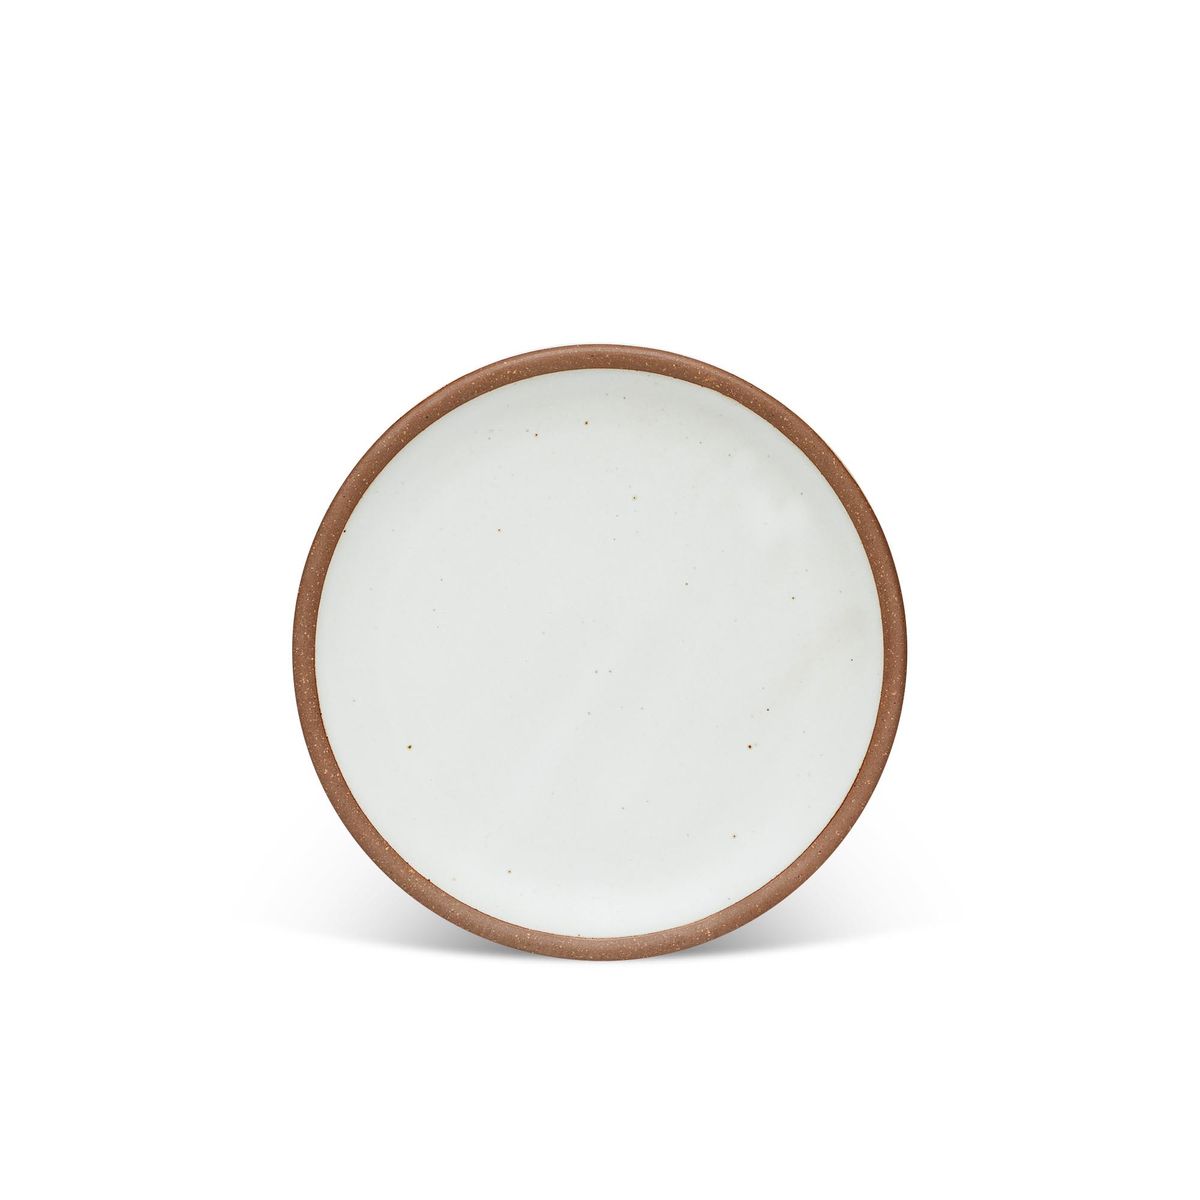 A medium sized ceramic plate in a cool white color featuring iron speckles and an unglazed rim